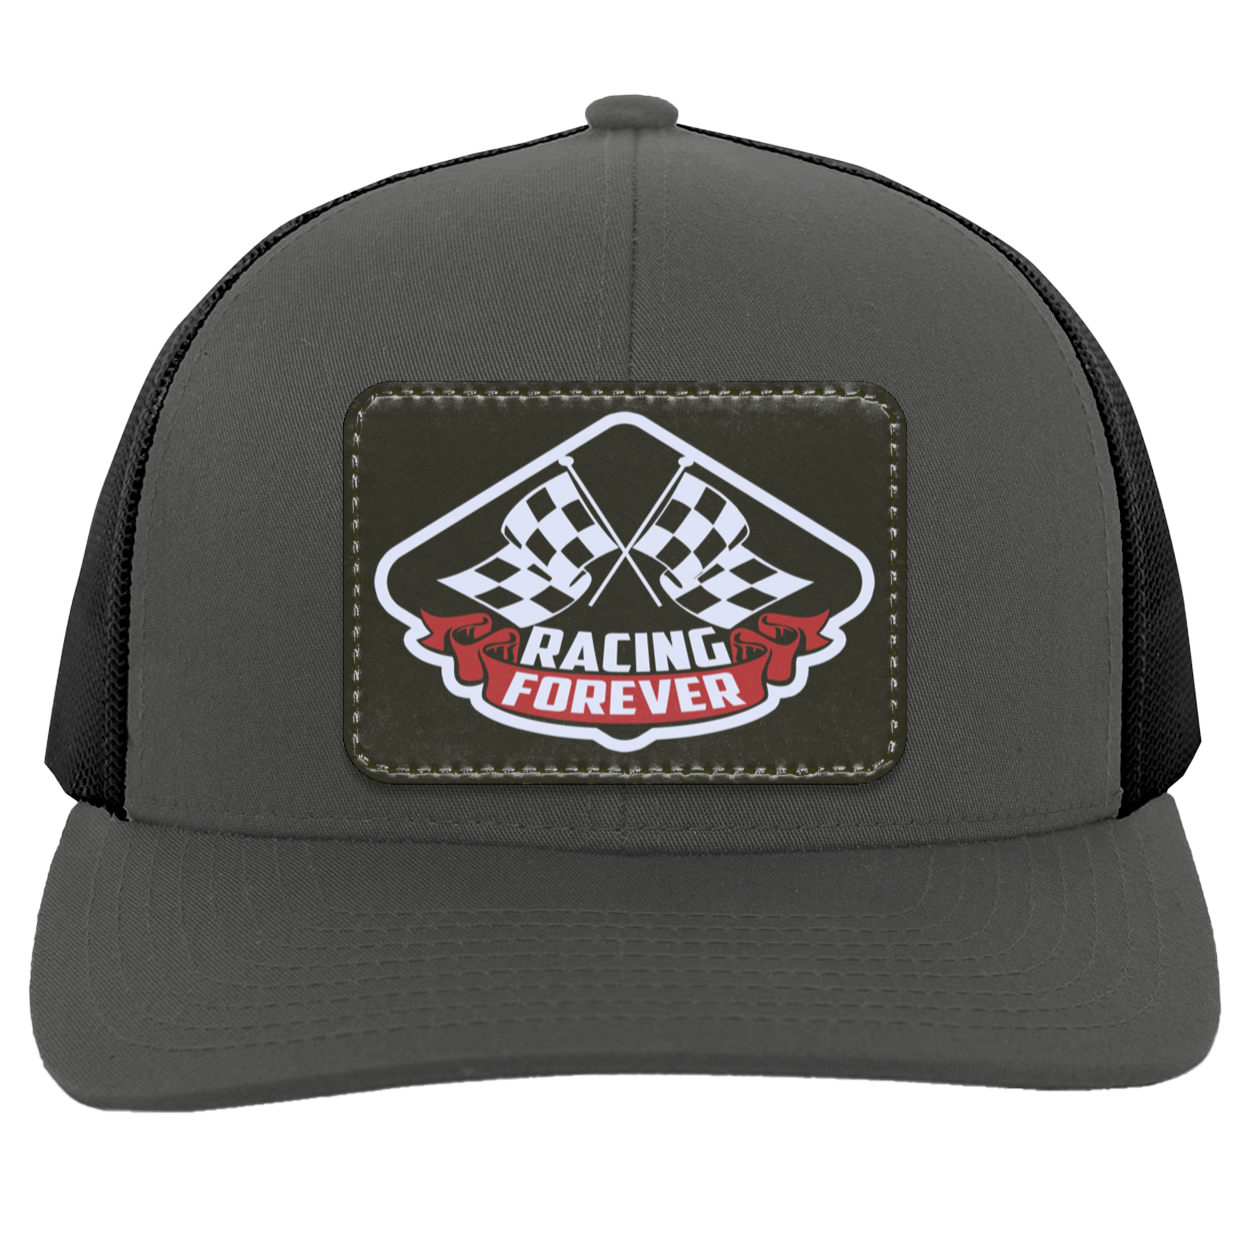 Racing Forever Trucker Patched Snap Back